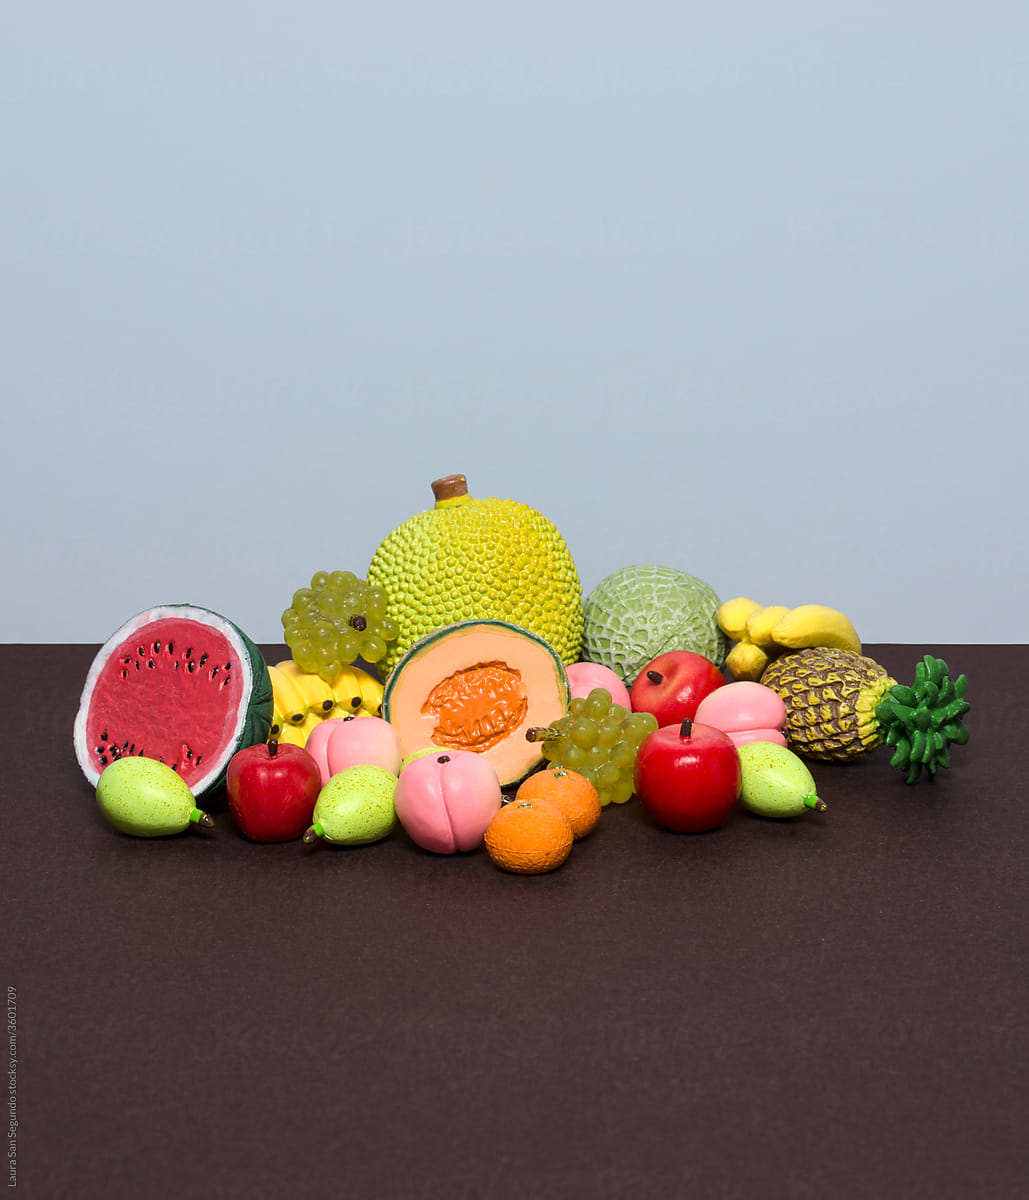 Still life with a display of miniature plastic fruits